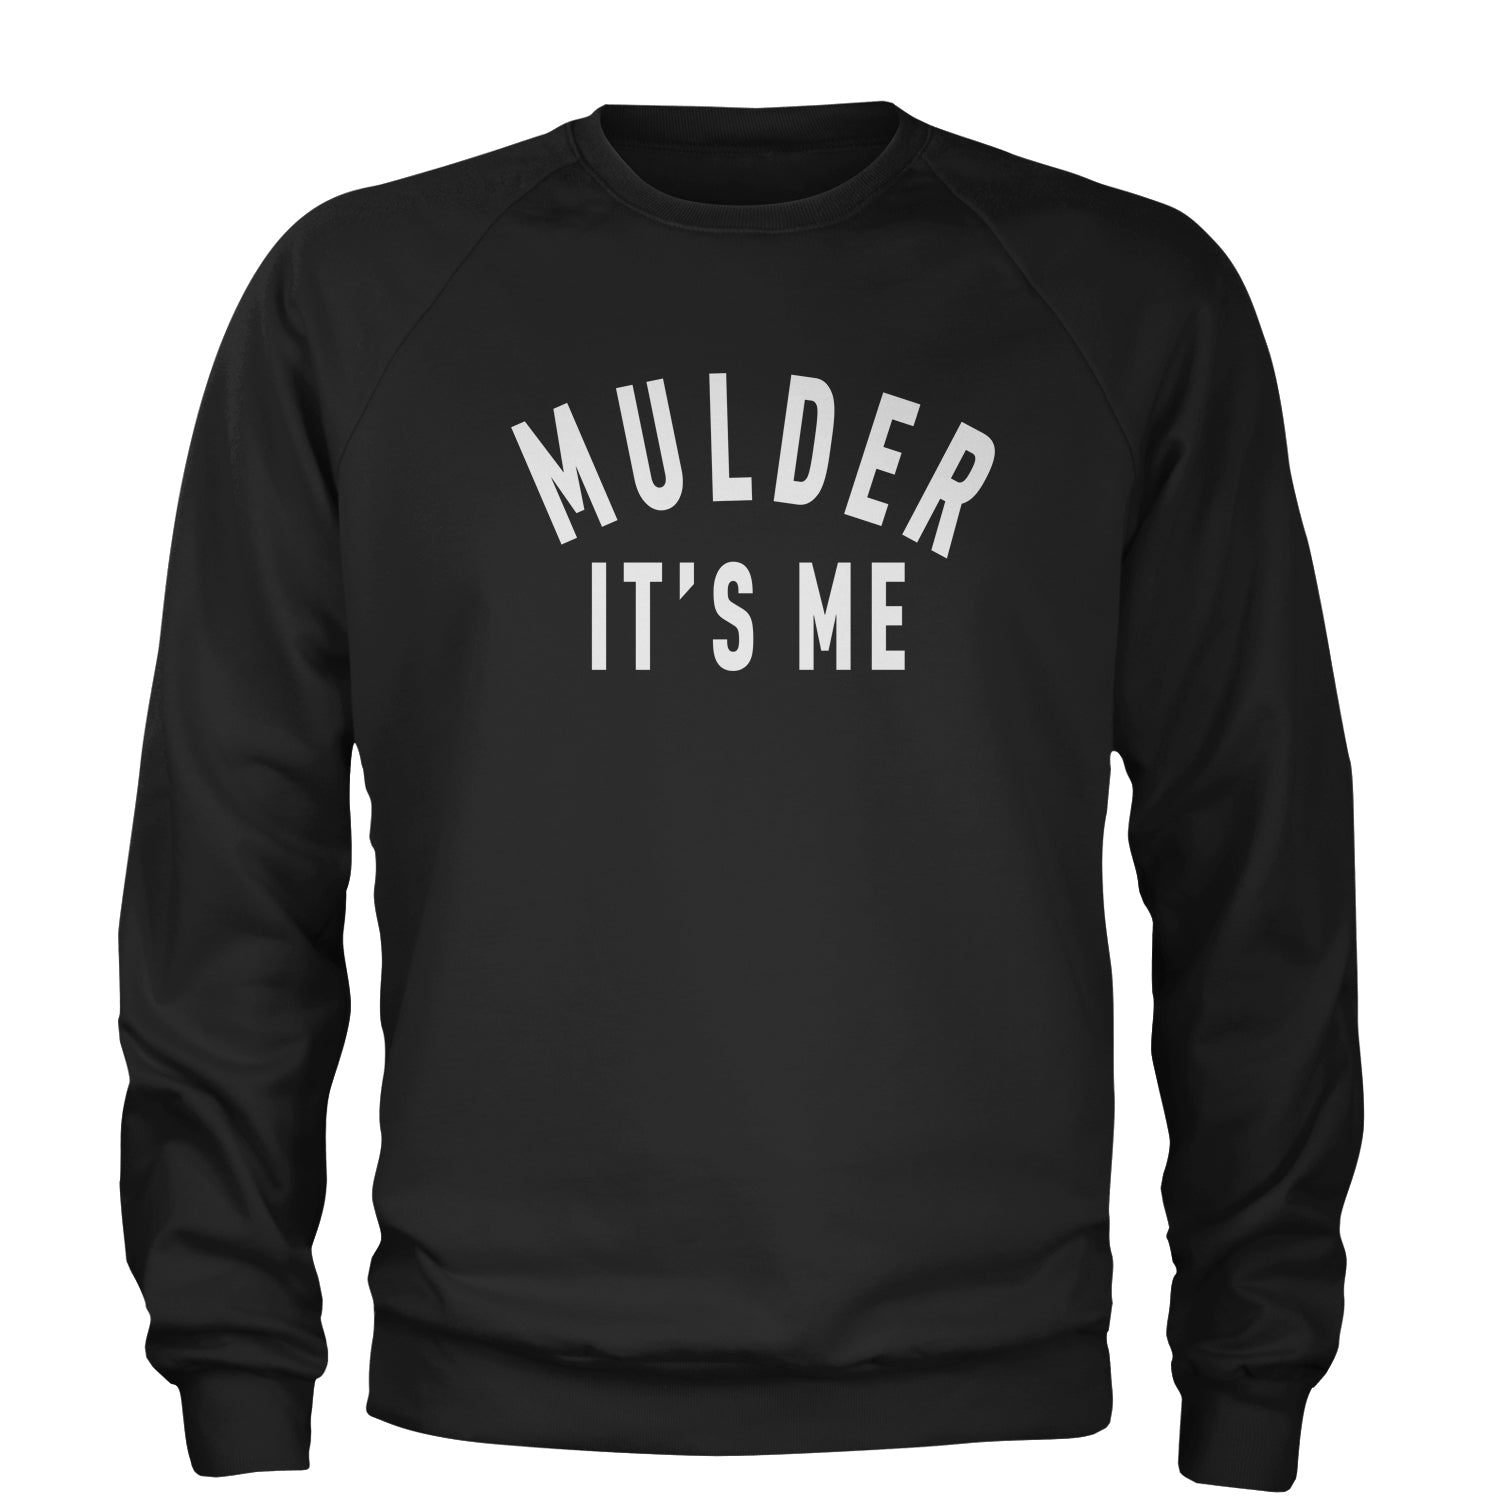 Mulder, It's Me Adult Crewneck Sweatshirt 51, area, believe, files, is, mulder, out, scully, the, there, truth, x, xfiles by Expression Tees